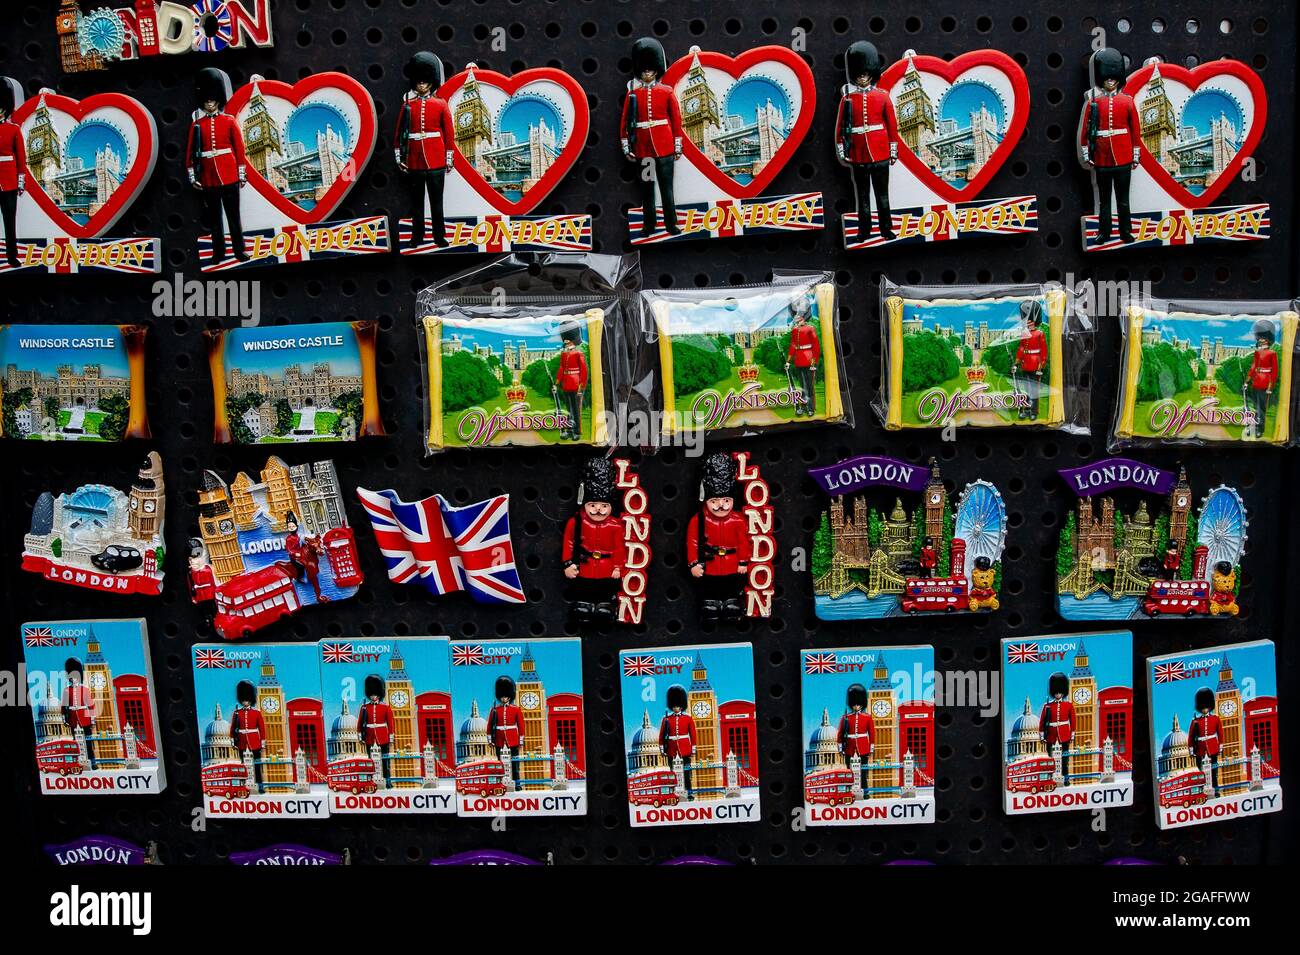 Windsor, Berkshire, UK. 26th July, 2021. Fridge magnets outside a corner shop in Windsor as tourists begin to return to Windsor following the lifting of the Covid-19 lockdown in England. Credit: Maureen McLean/Alamy Stock Photo